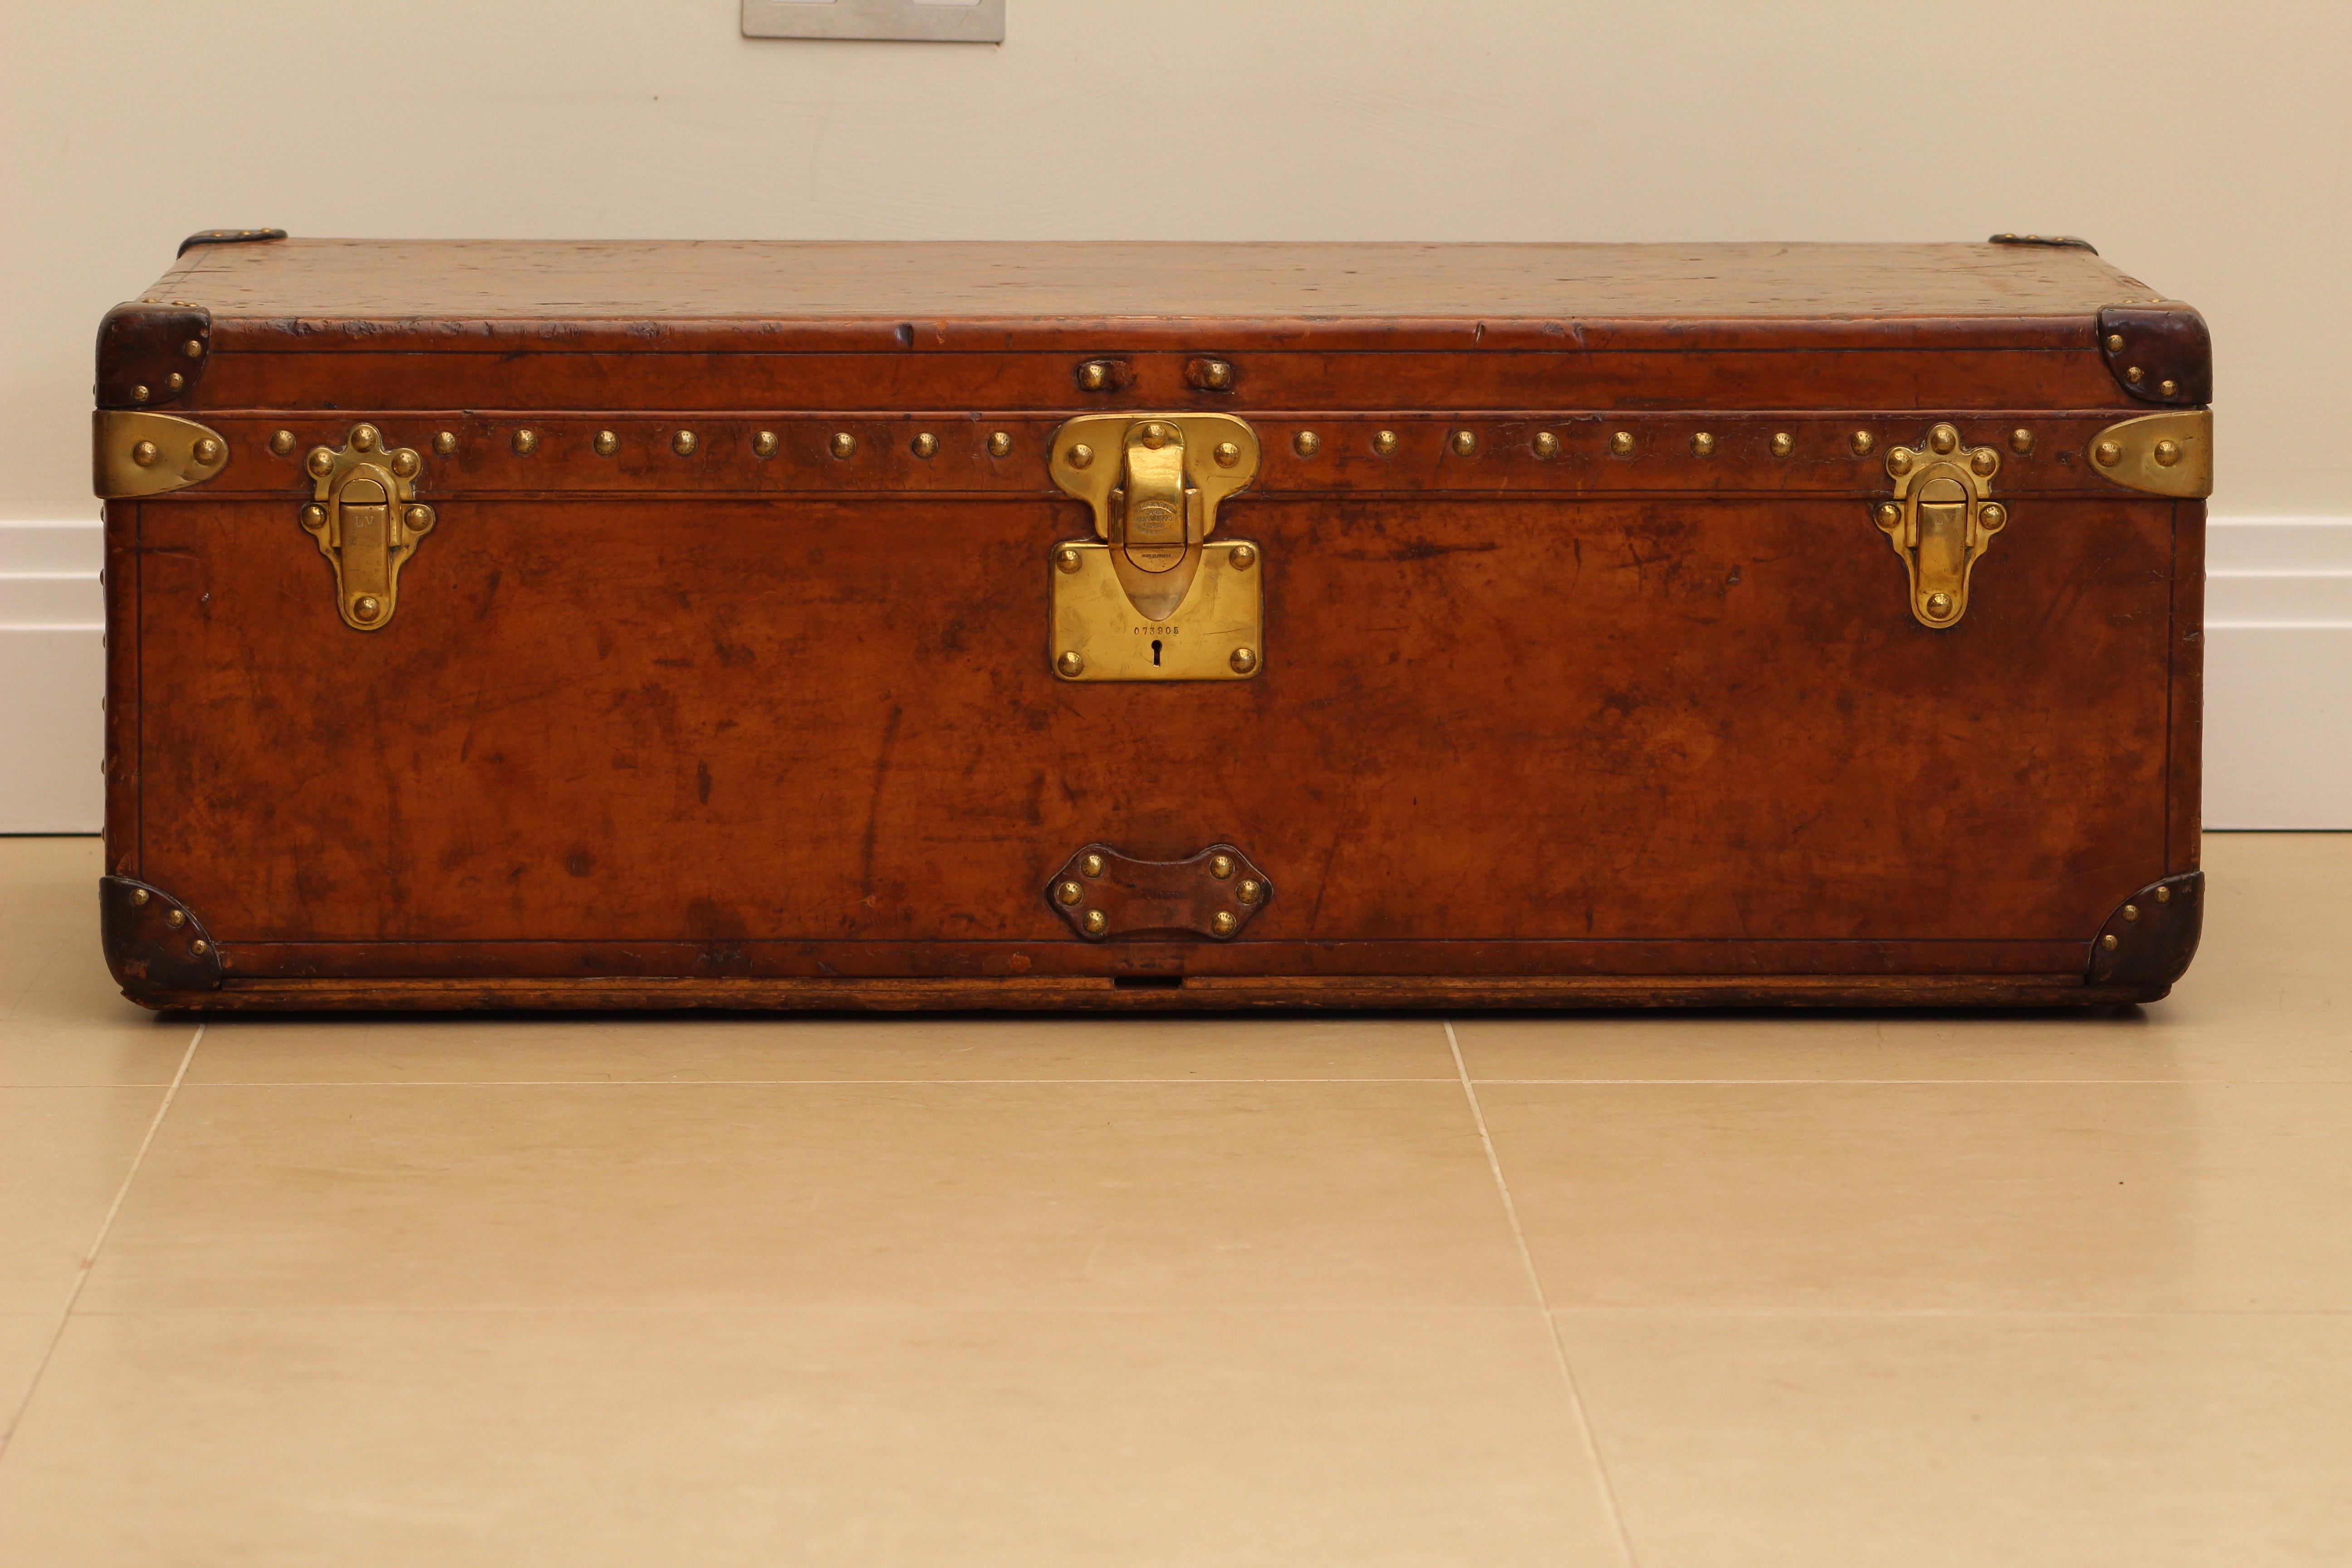 The 1920s Louis Vuitton Cowhide Leather Cabin Trunk is a magnificent artifact, evoking a bygone era where the elegance of travel and personal style walked hand in hand. This trunk, with its sophisticated design and impeccable craftsmanship, stands